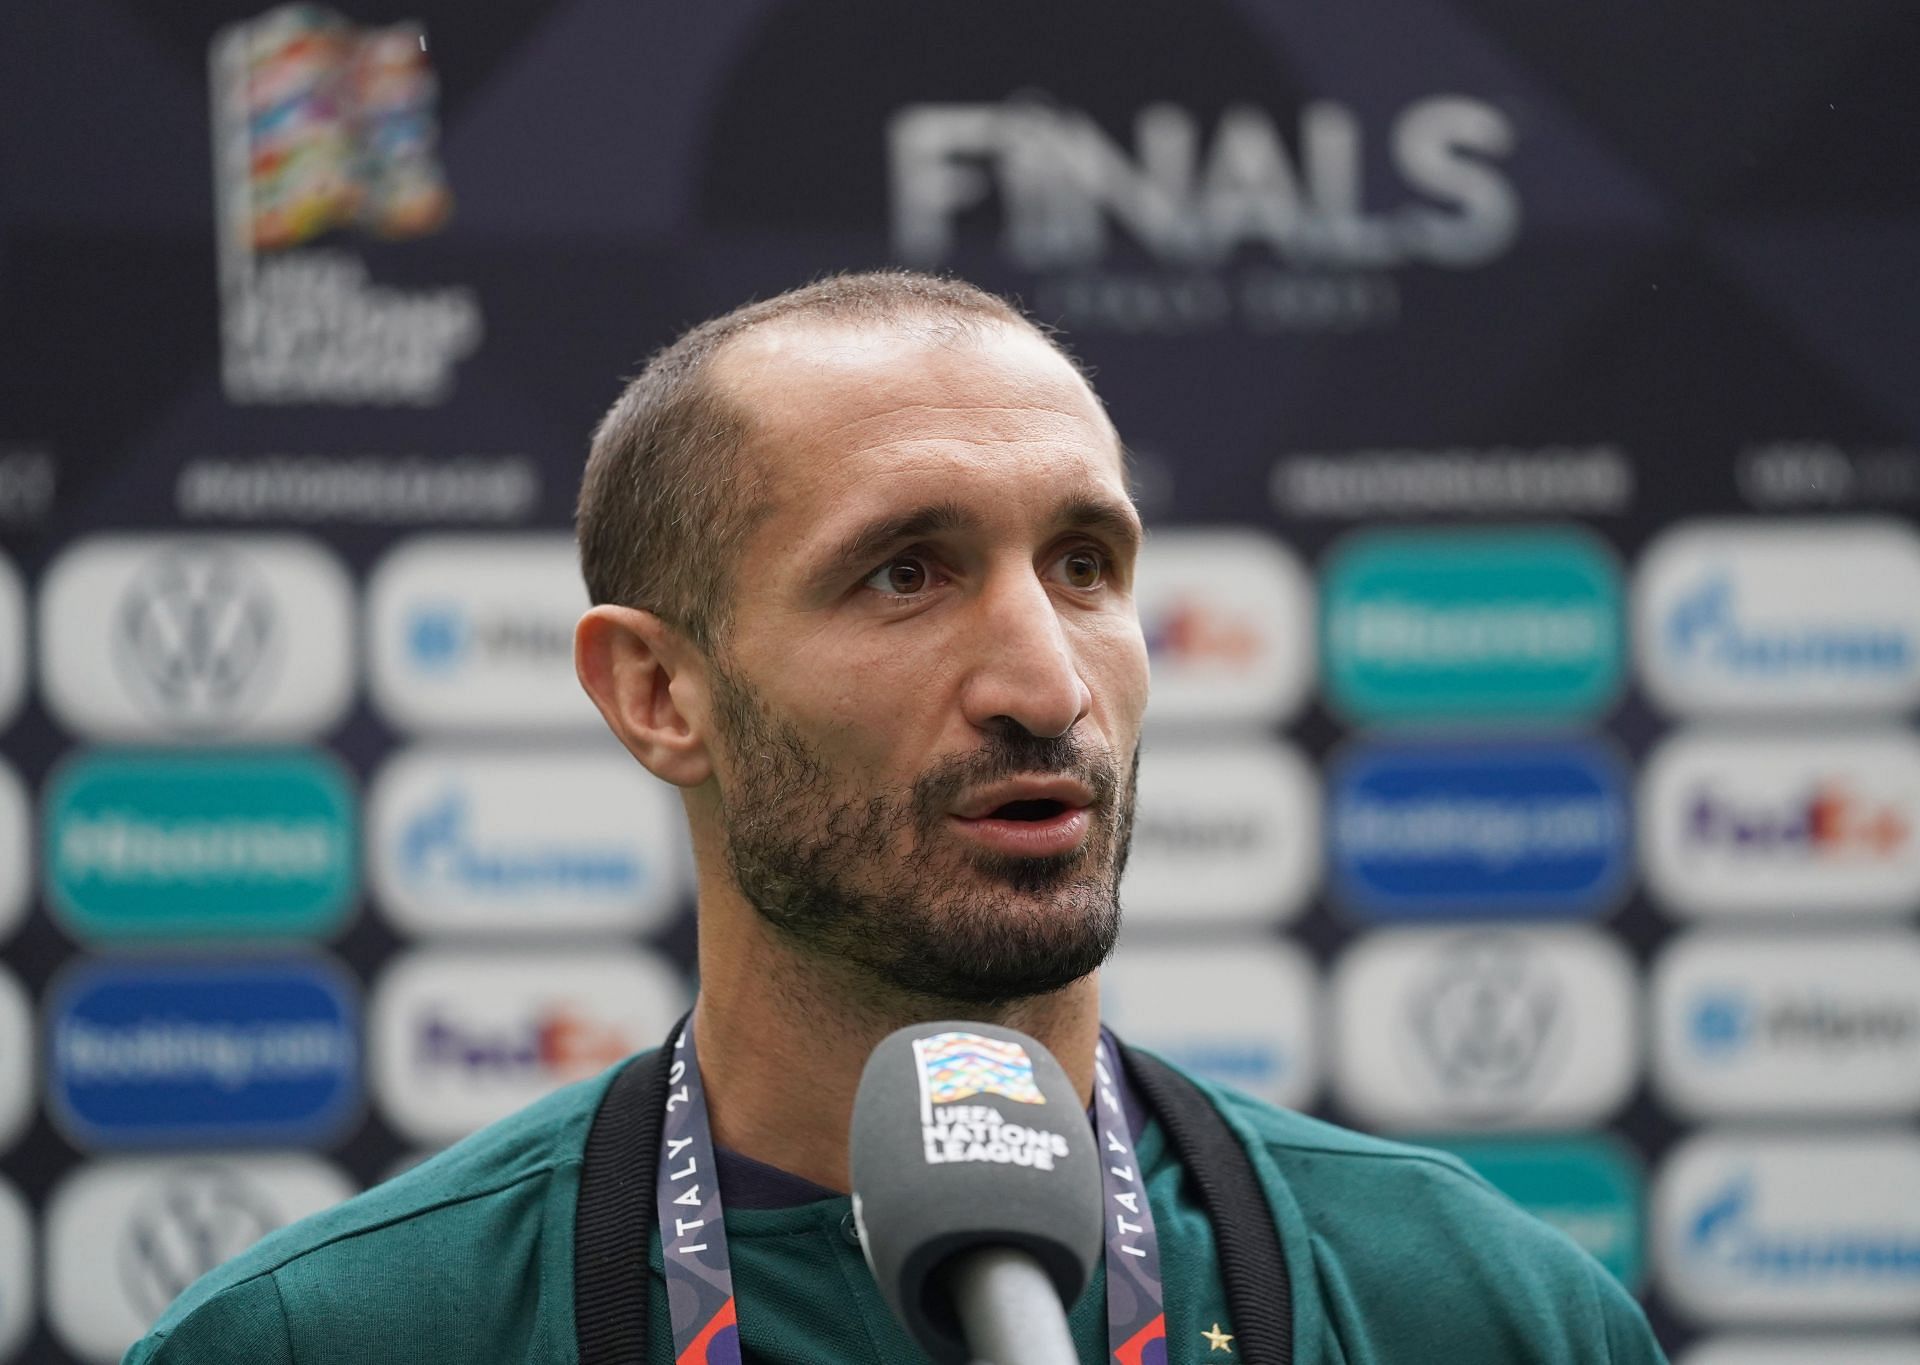 Giorgio Chiellini is looking to move to Major League Soccer side Los Angeles FC after 17 years spell at Juventus